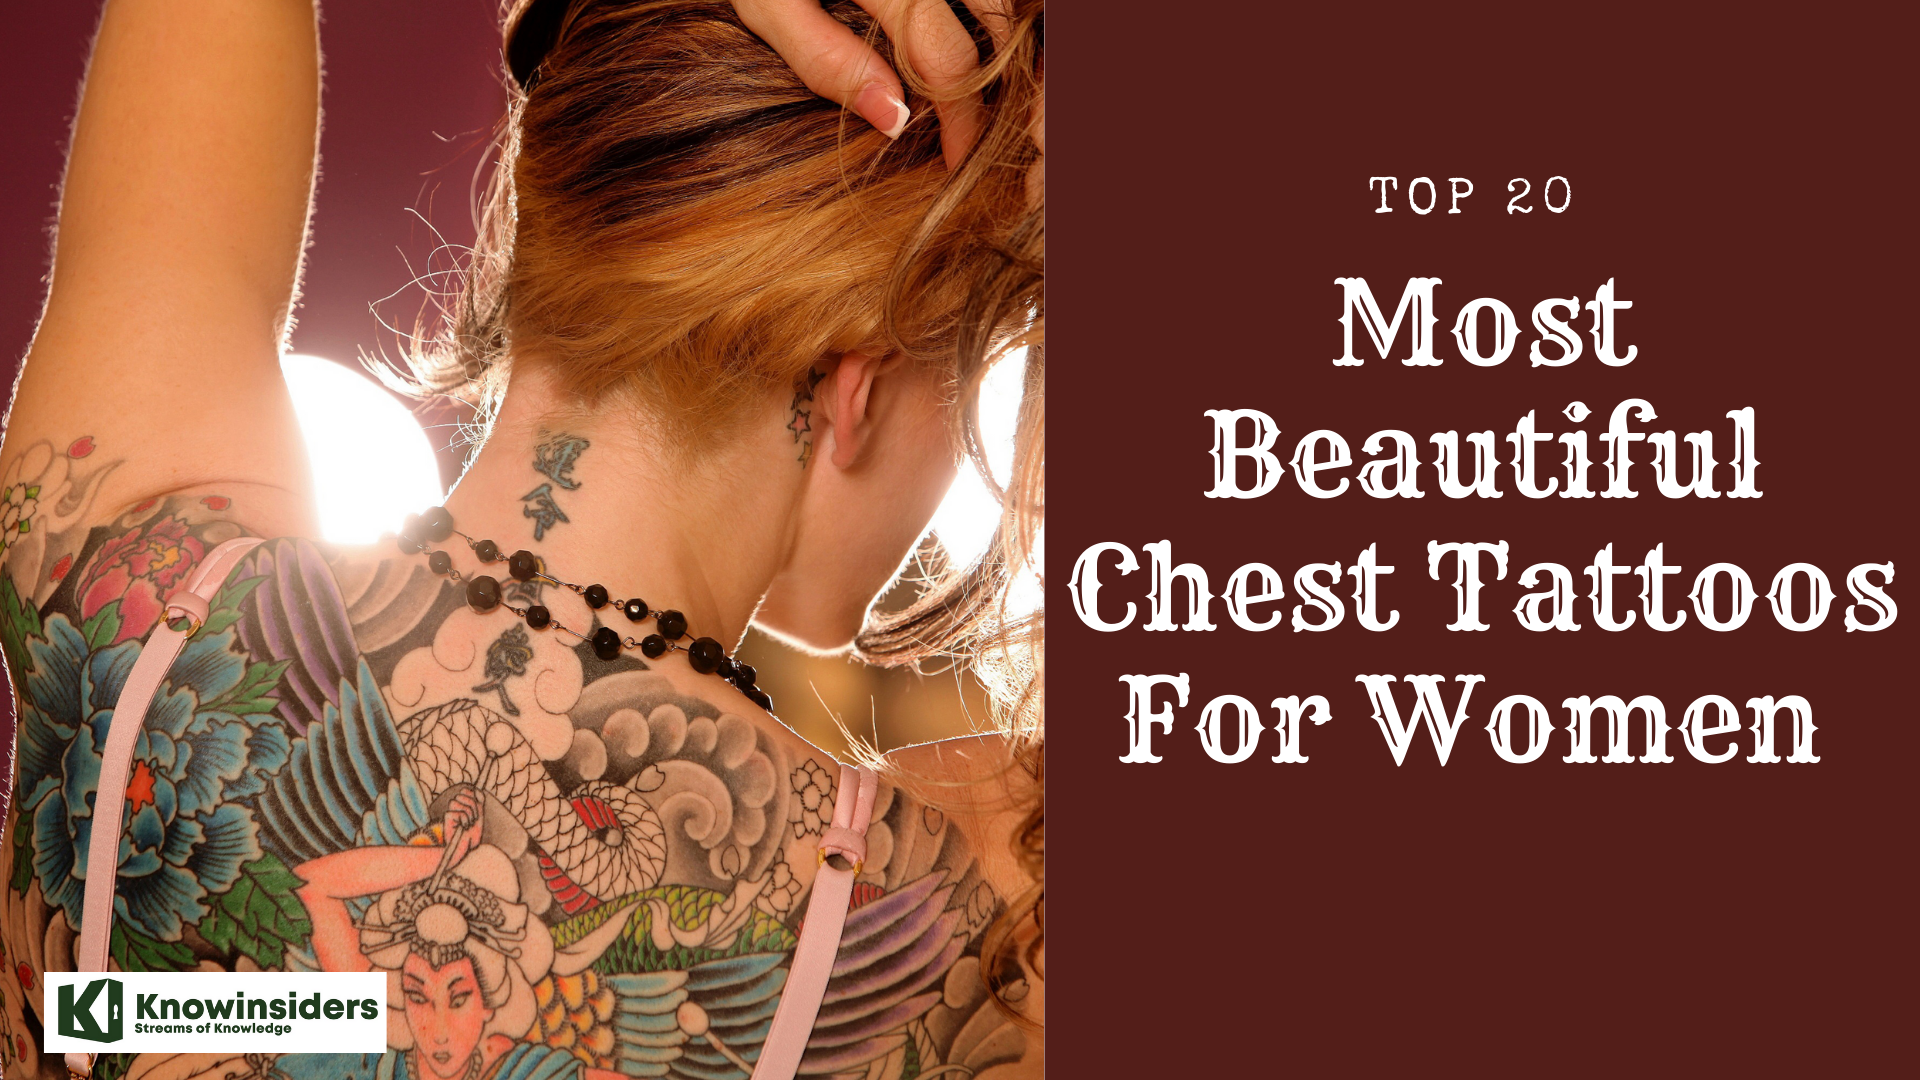 Top 20 most beautiful chest tattoos for women 